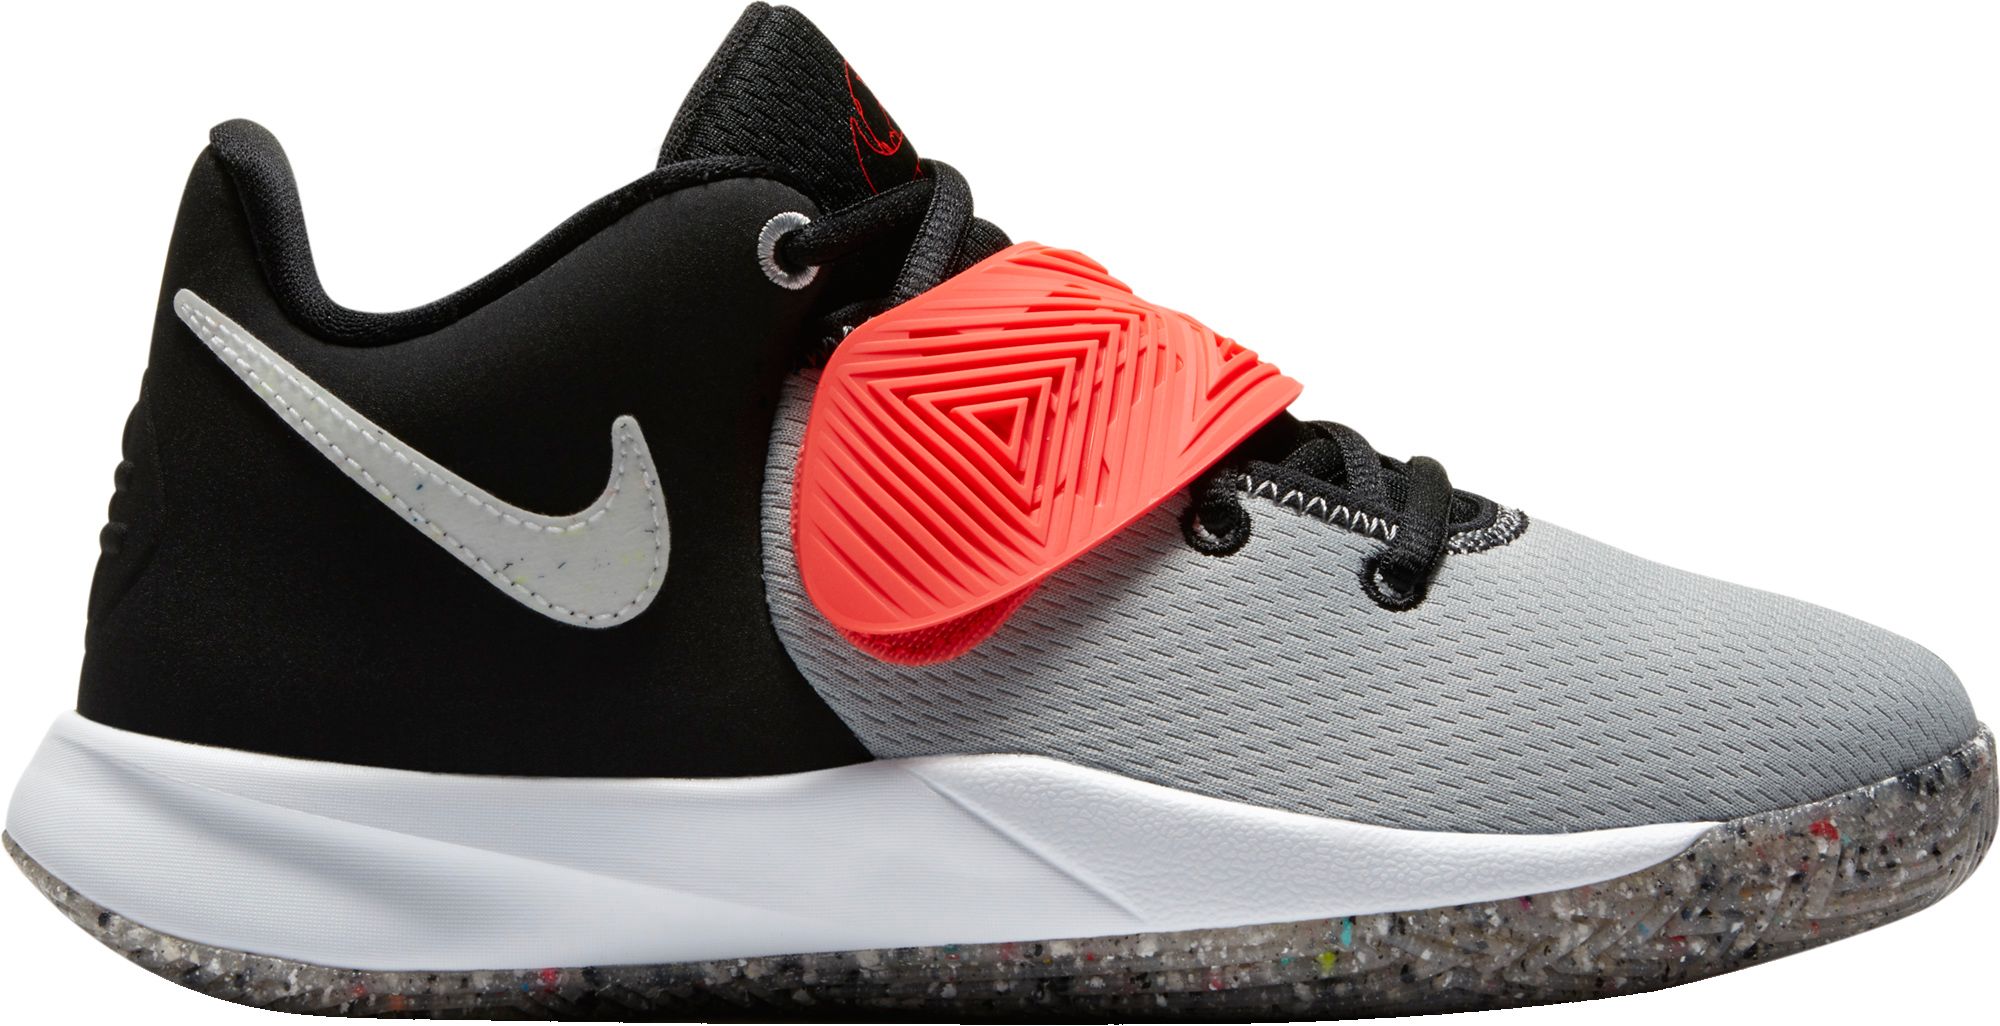 kyrie flytrap 3 youth